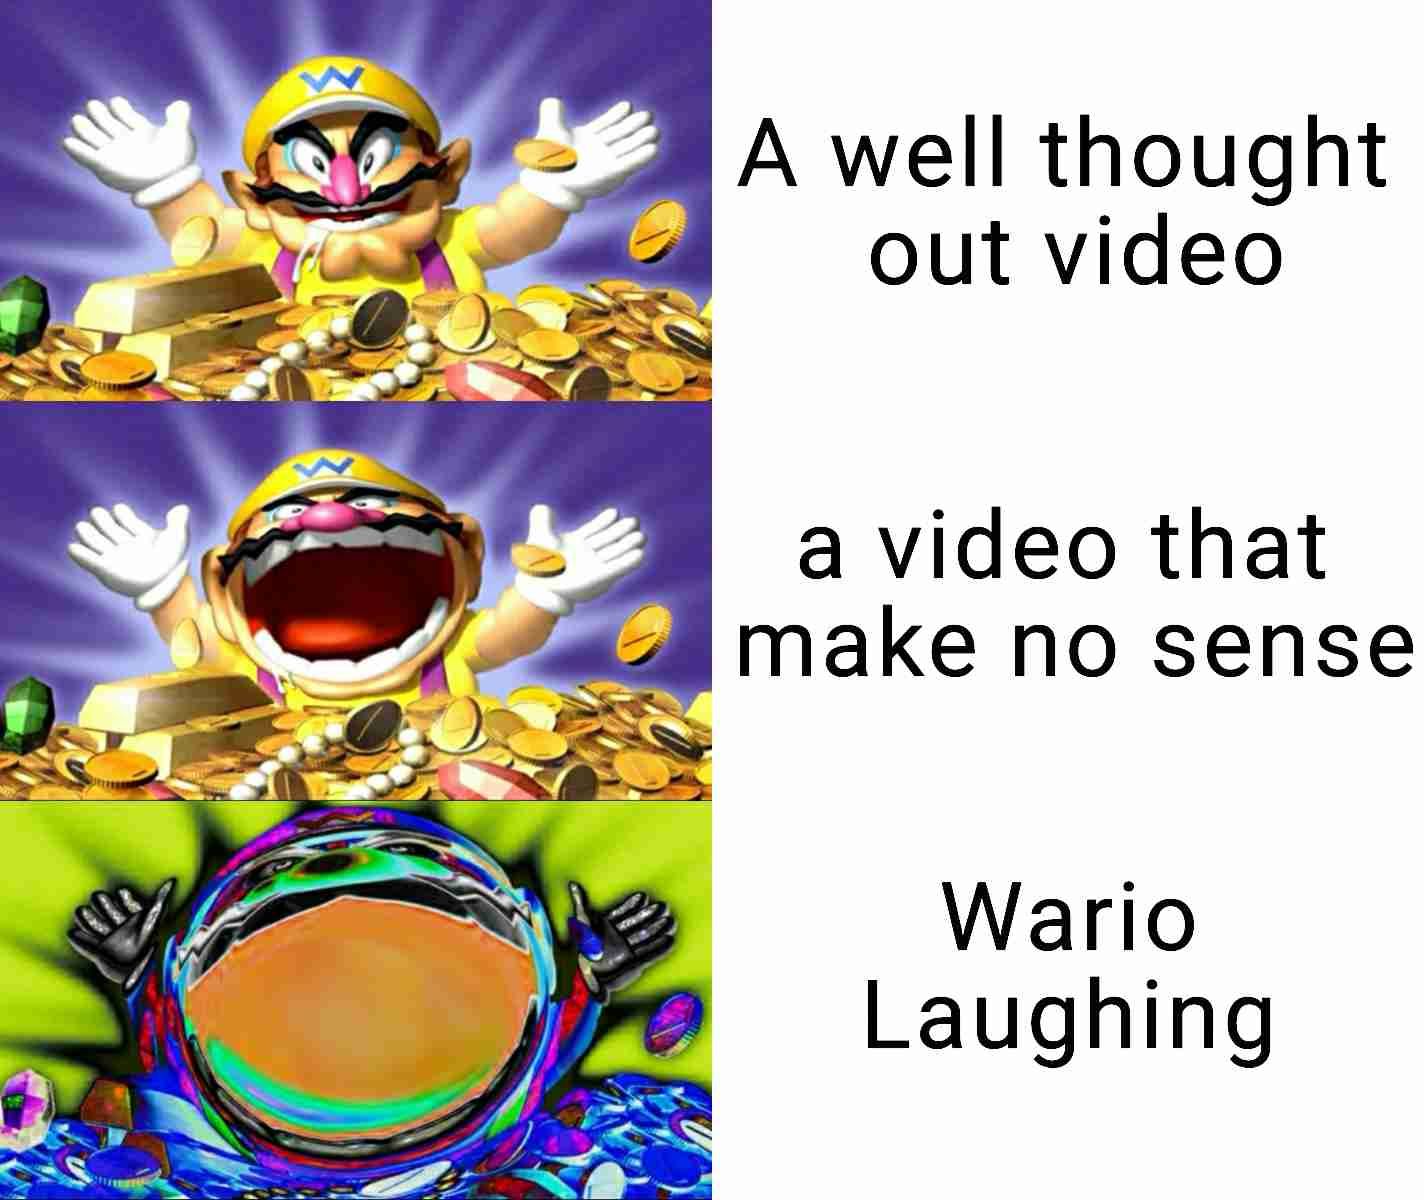 A scrolling down meme about Wario laughing.